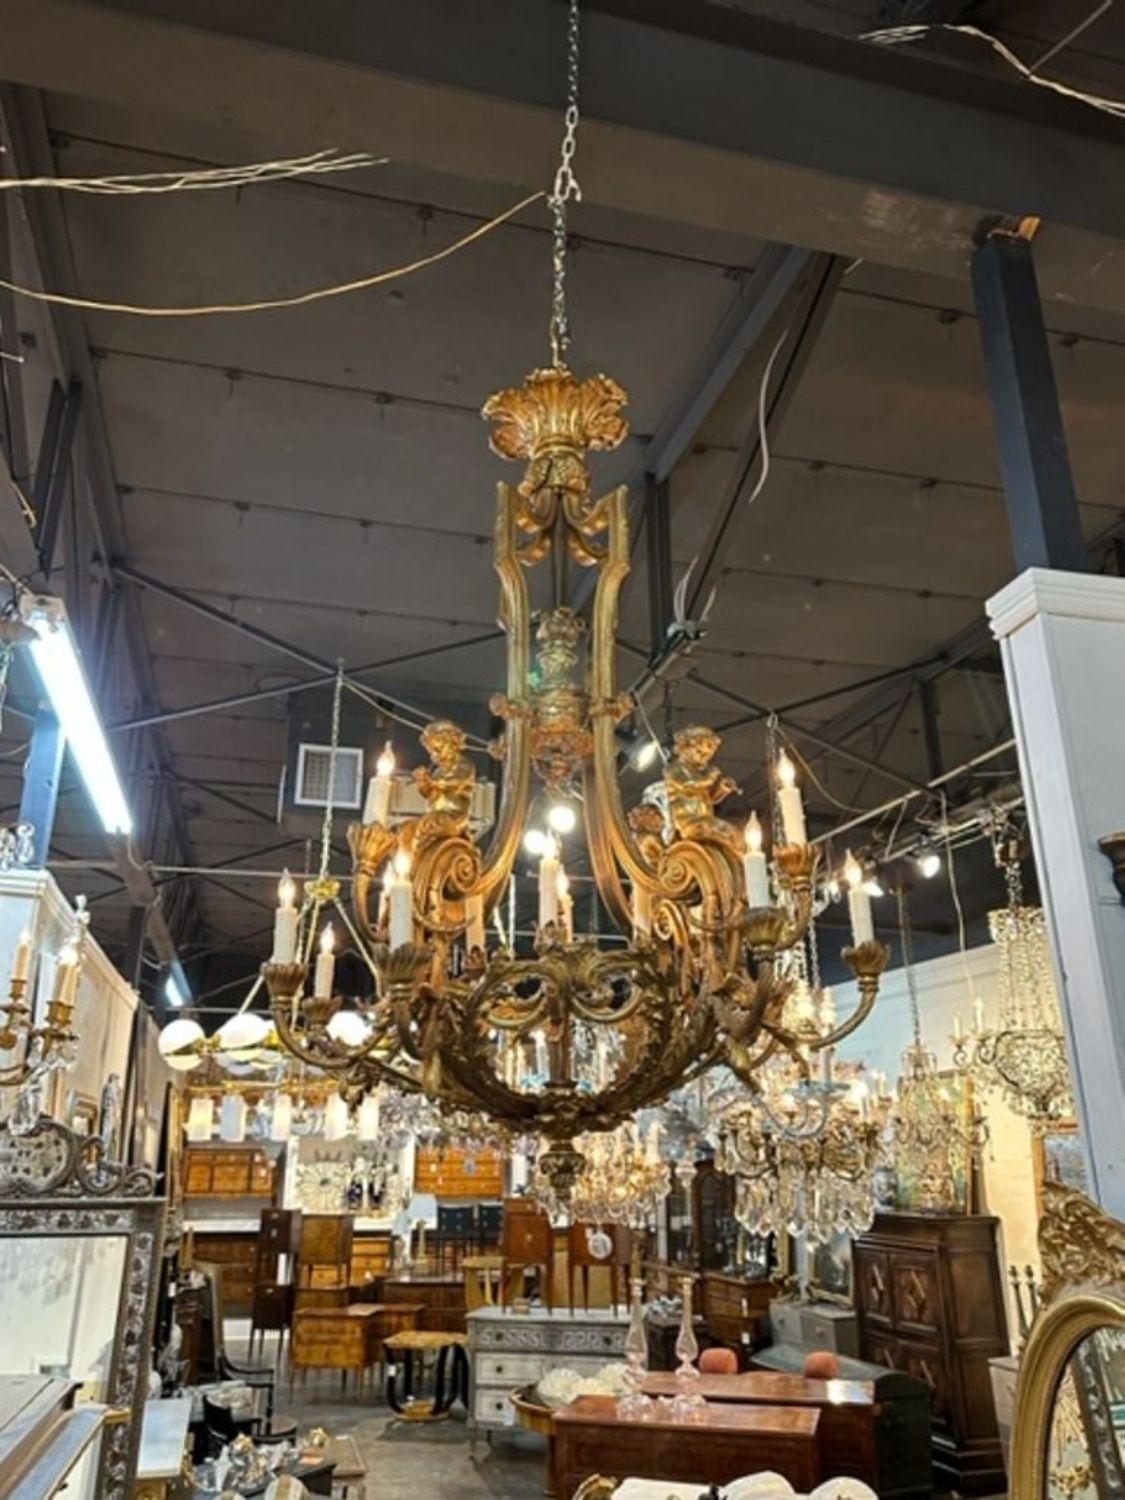 19th century French Louis XV style gild bronze chandelier, circa 1860. The chandelier has been professionally rewired, comes with matching chain and canopy. It is ready to hang!